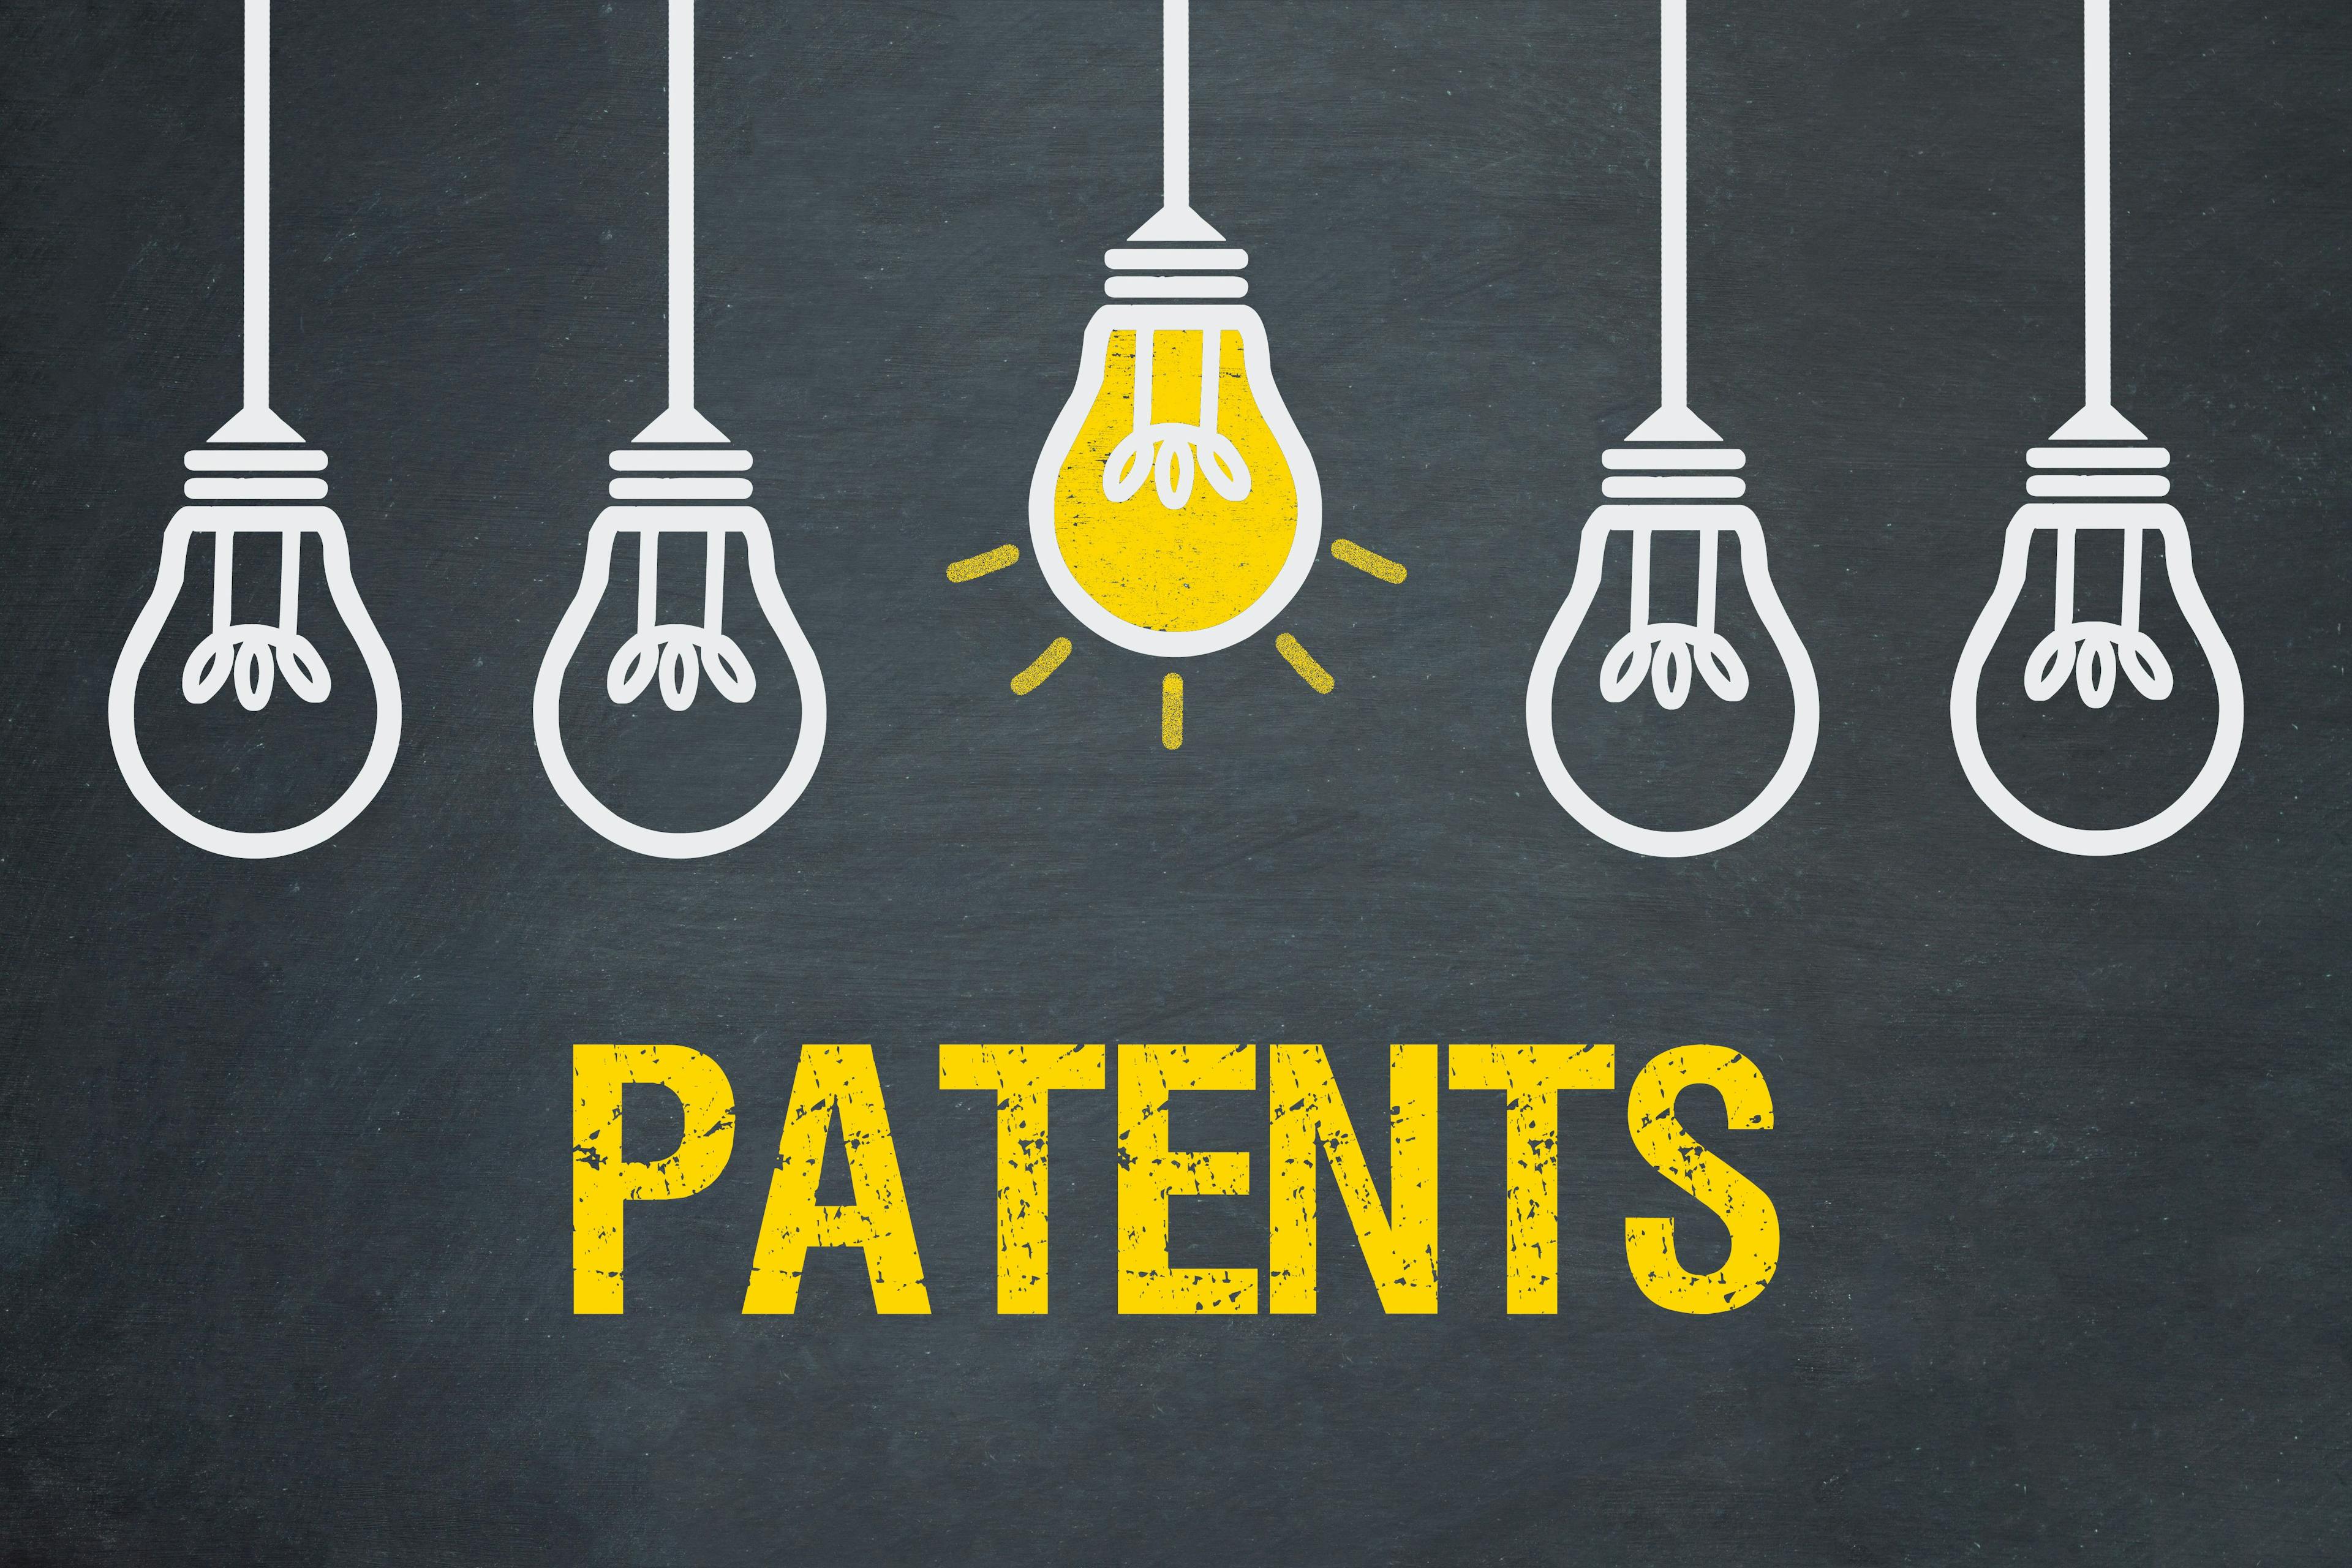 How to use patents to maximize value for your venture